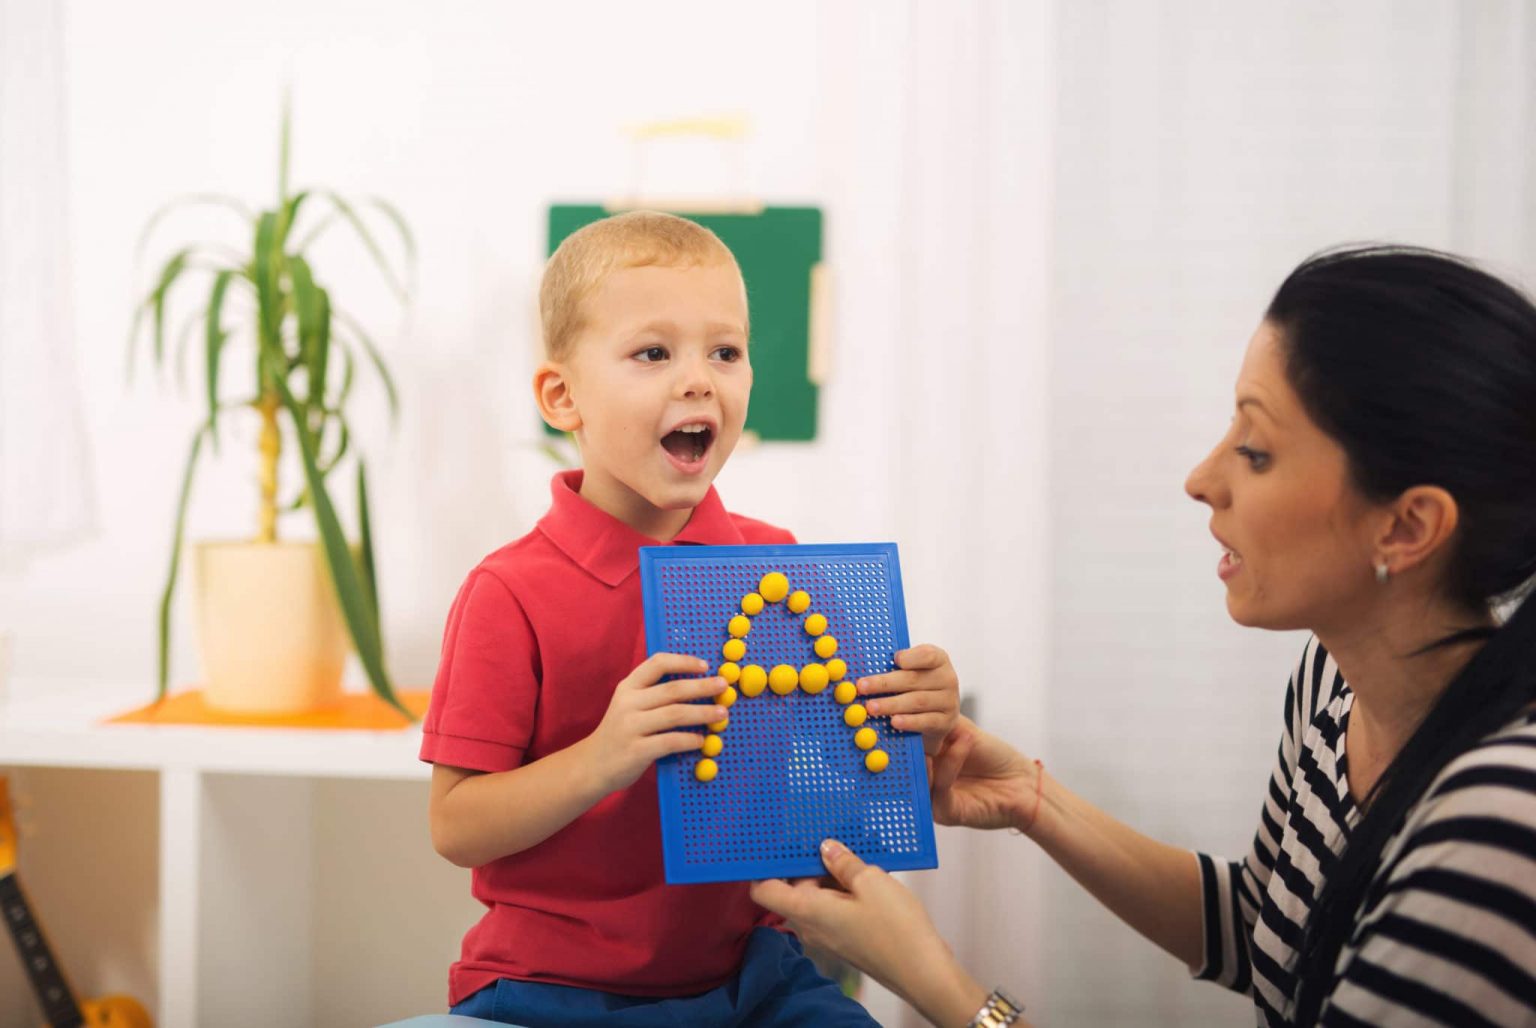 A young boy holding a sign with an A on it learning how to say A in speech therapy.